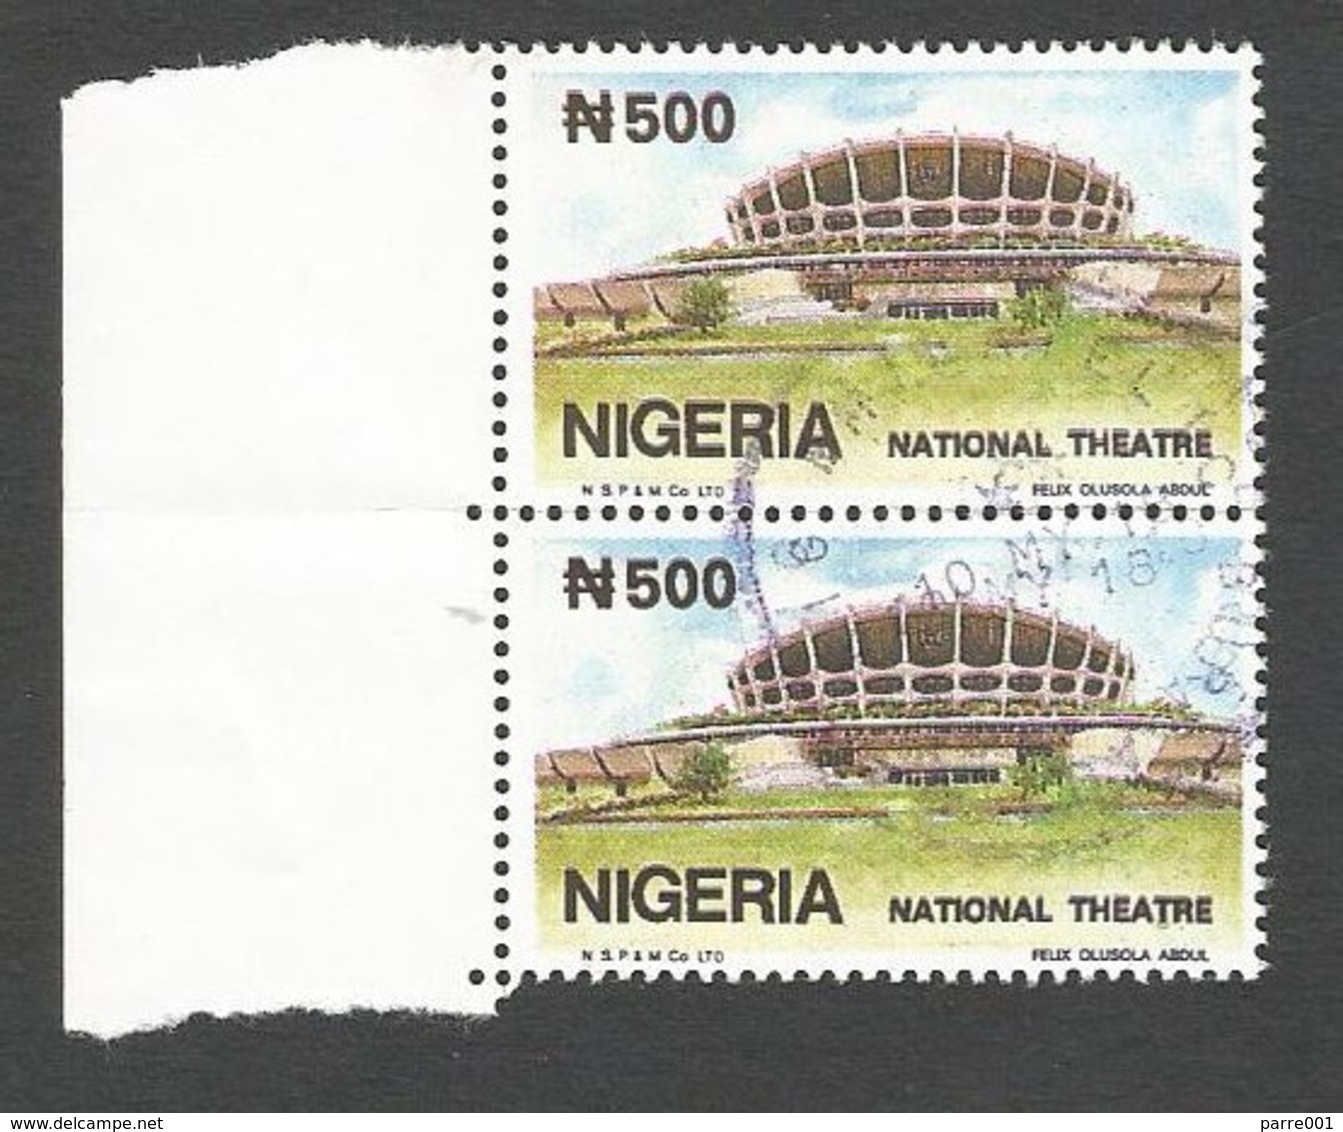 Nigeria 1990 National Theater N500 Michel D546 A Perforation 14.5 Unreported Used Pair - Nigeria (1961-...)